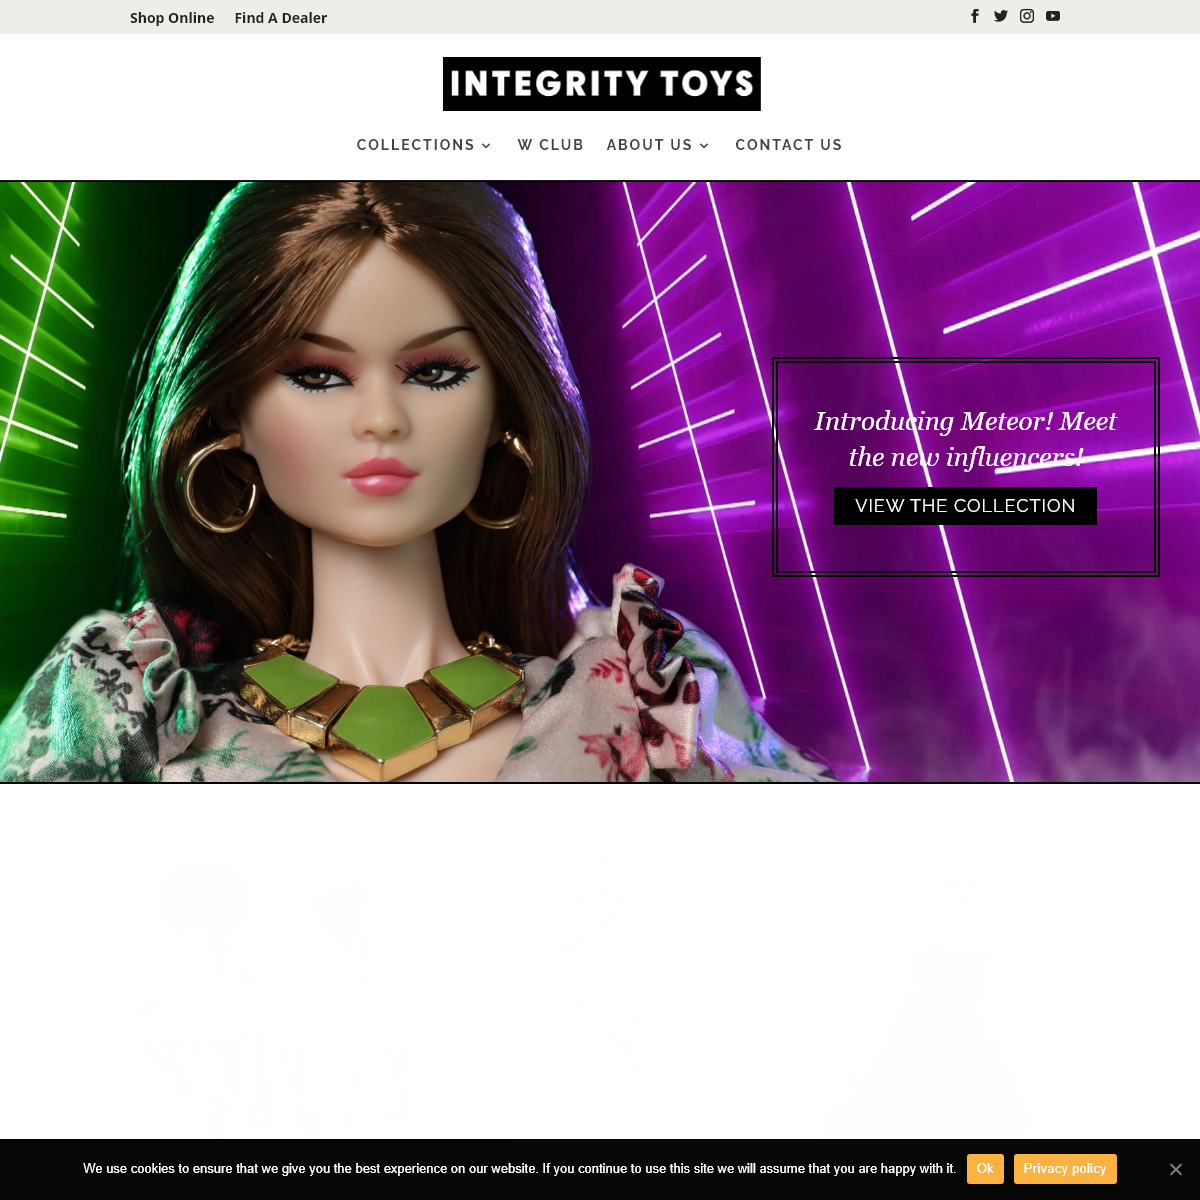 A complete backup of integritytoys.com